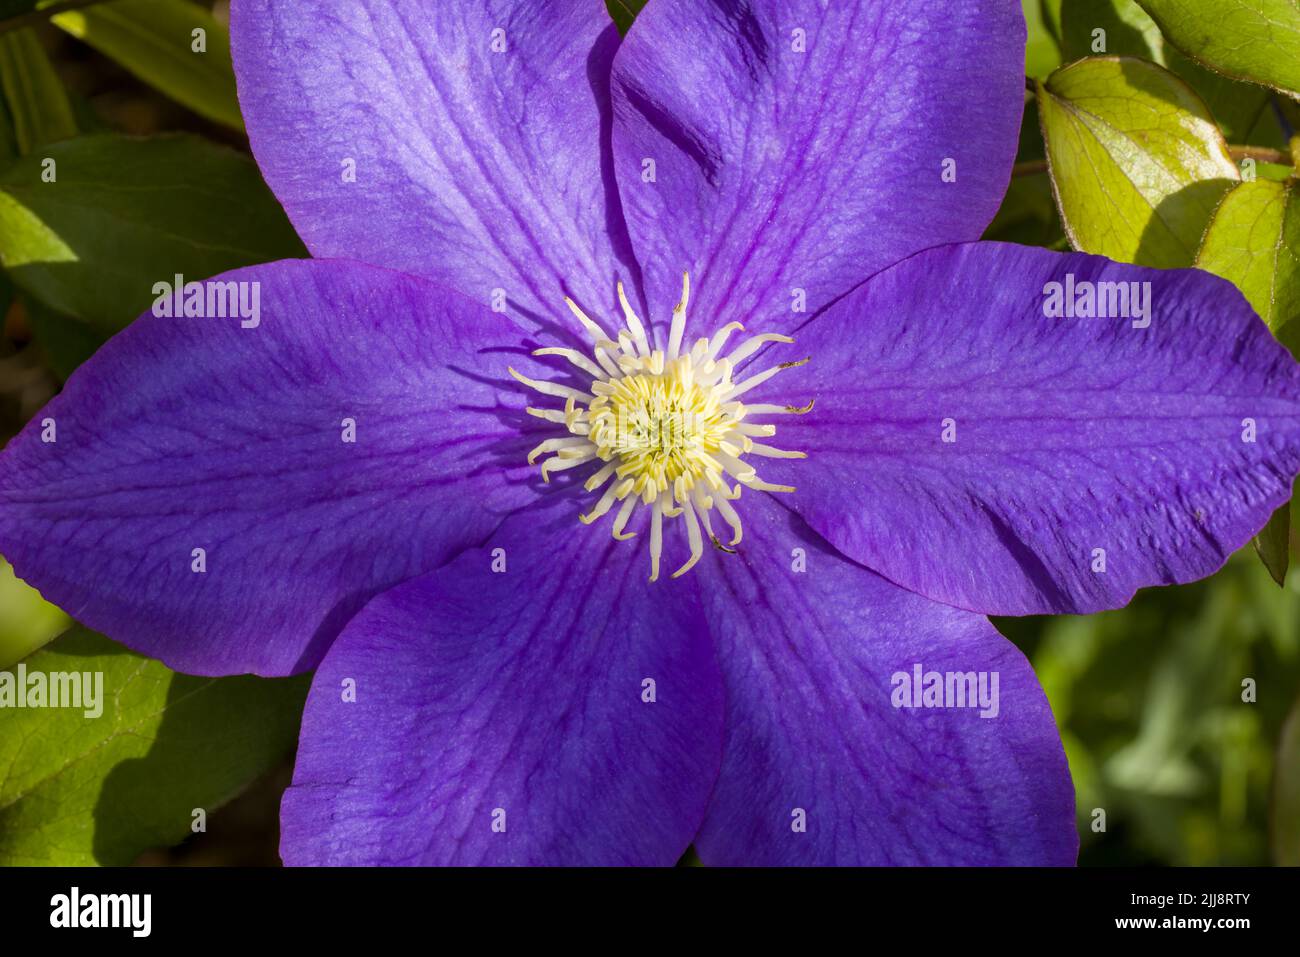 Close up of a brightly coloured, deep purple Clematis flower Stock Photo